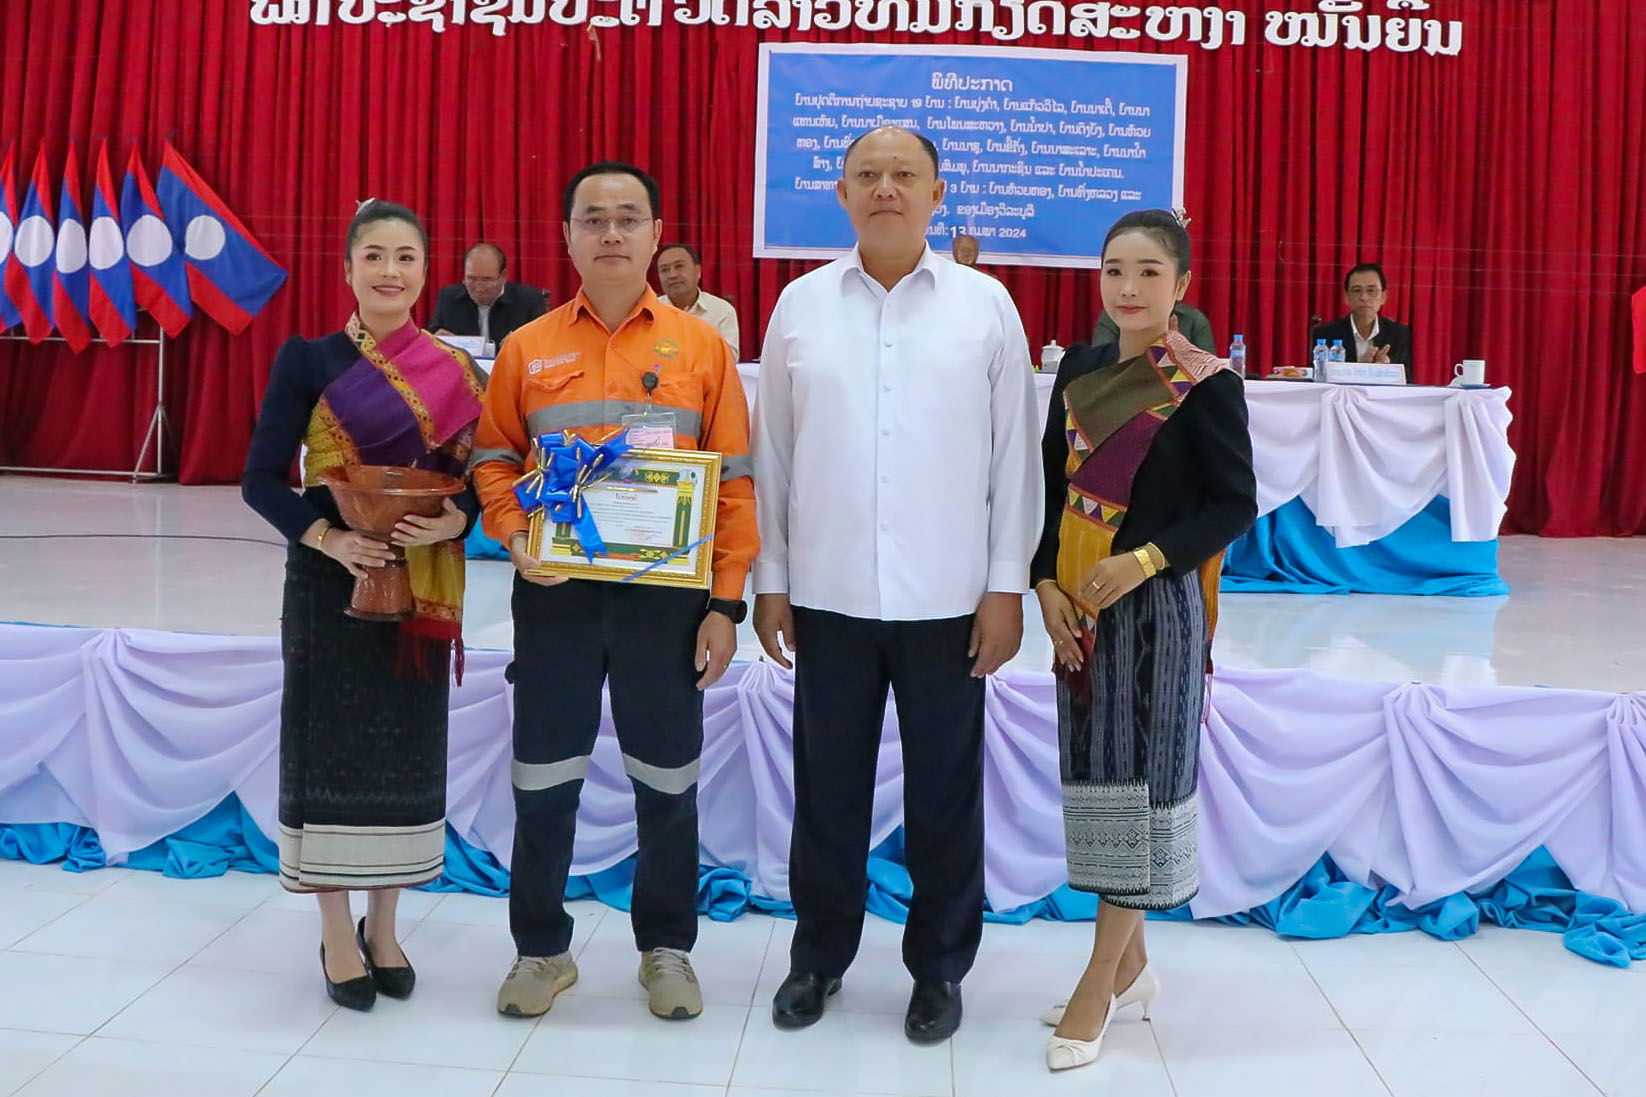 Savannakhet Governor Commends LXML for Community Hygiene Support